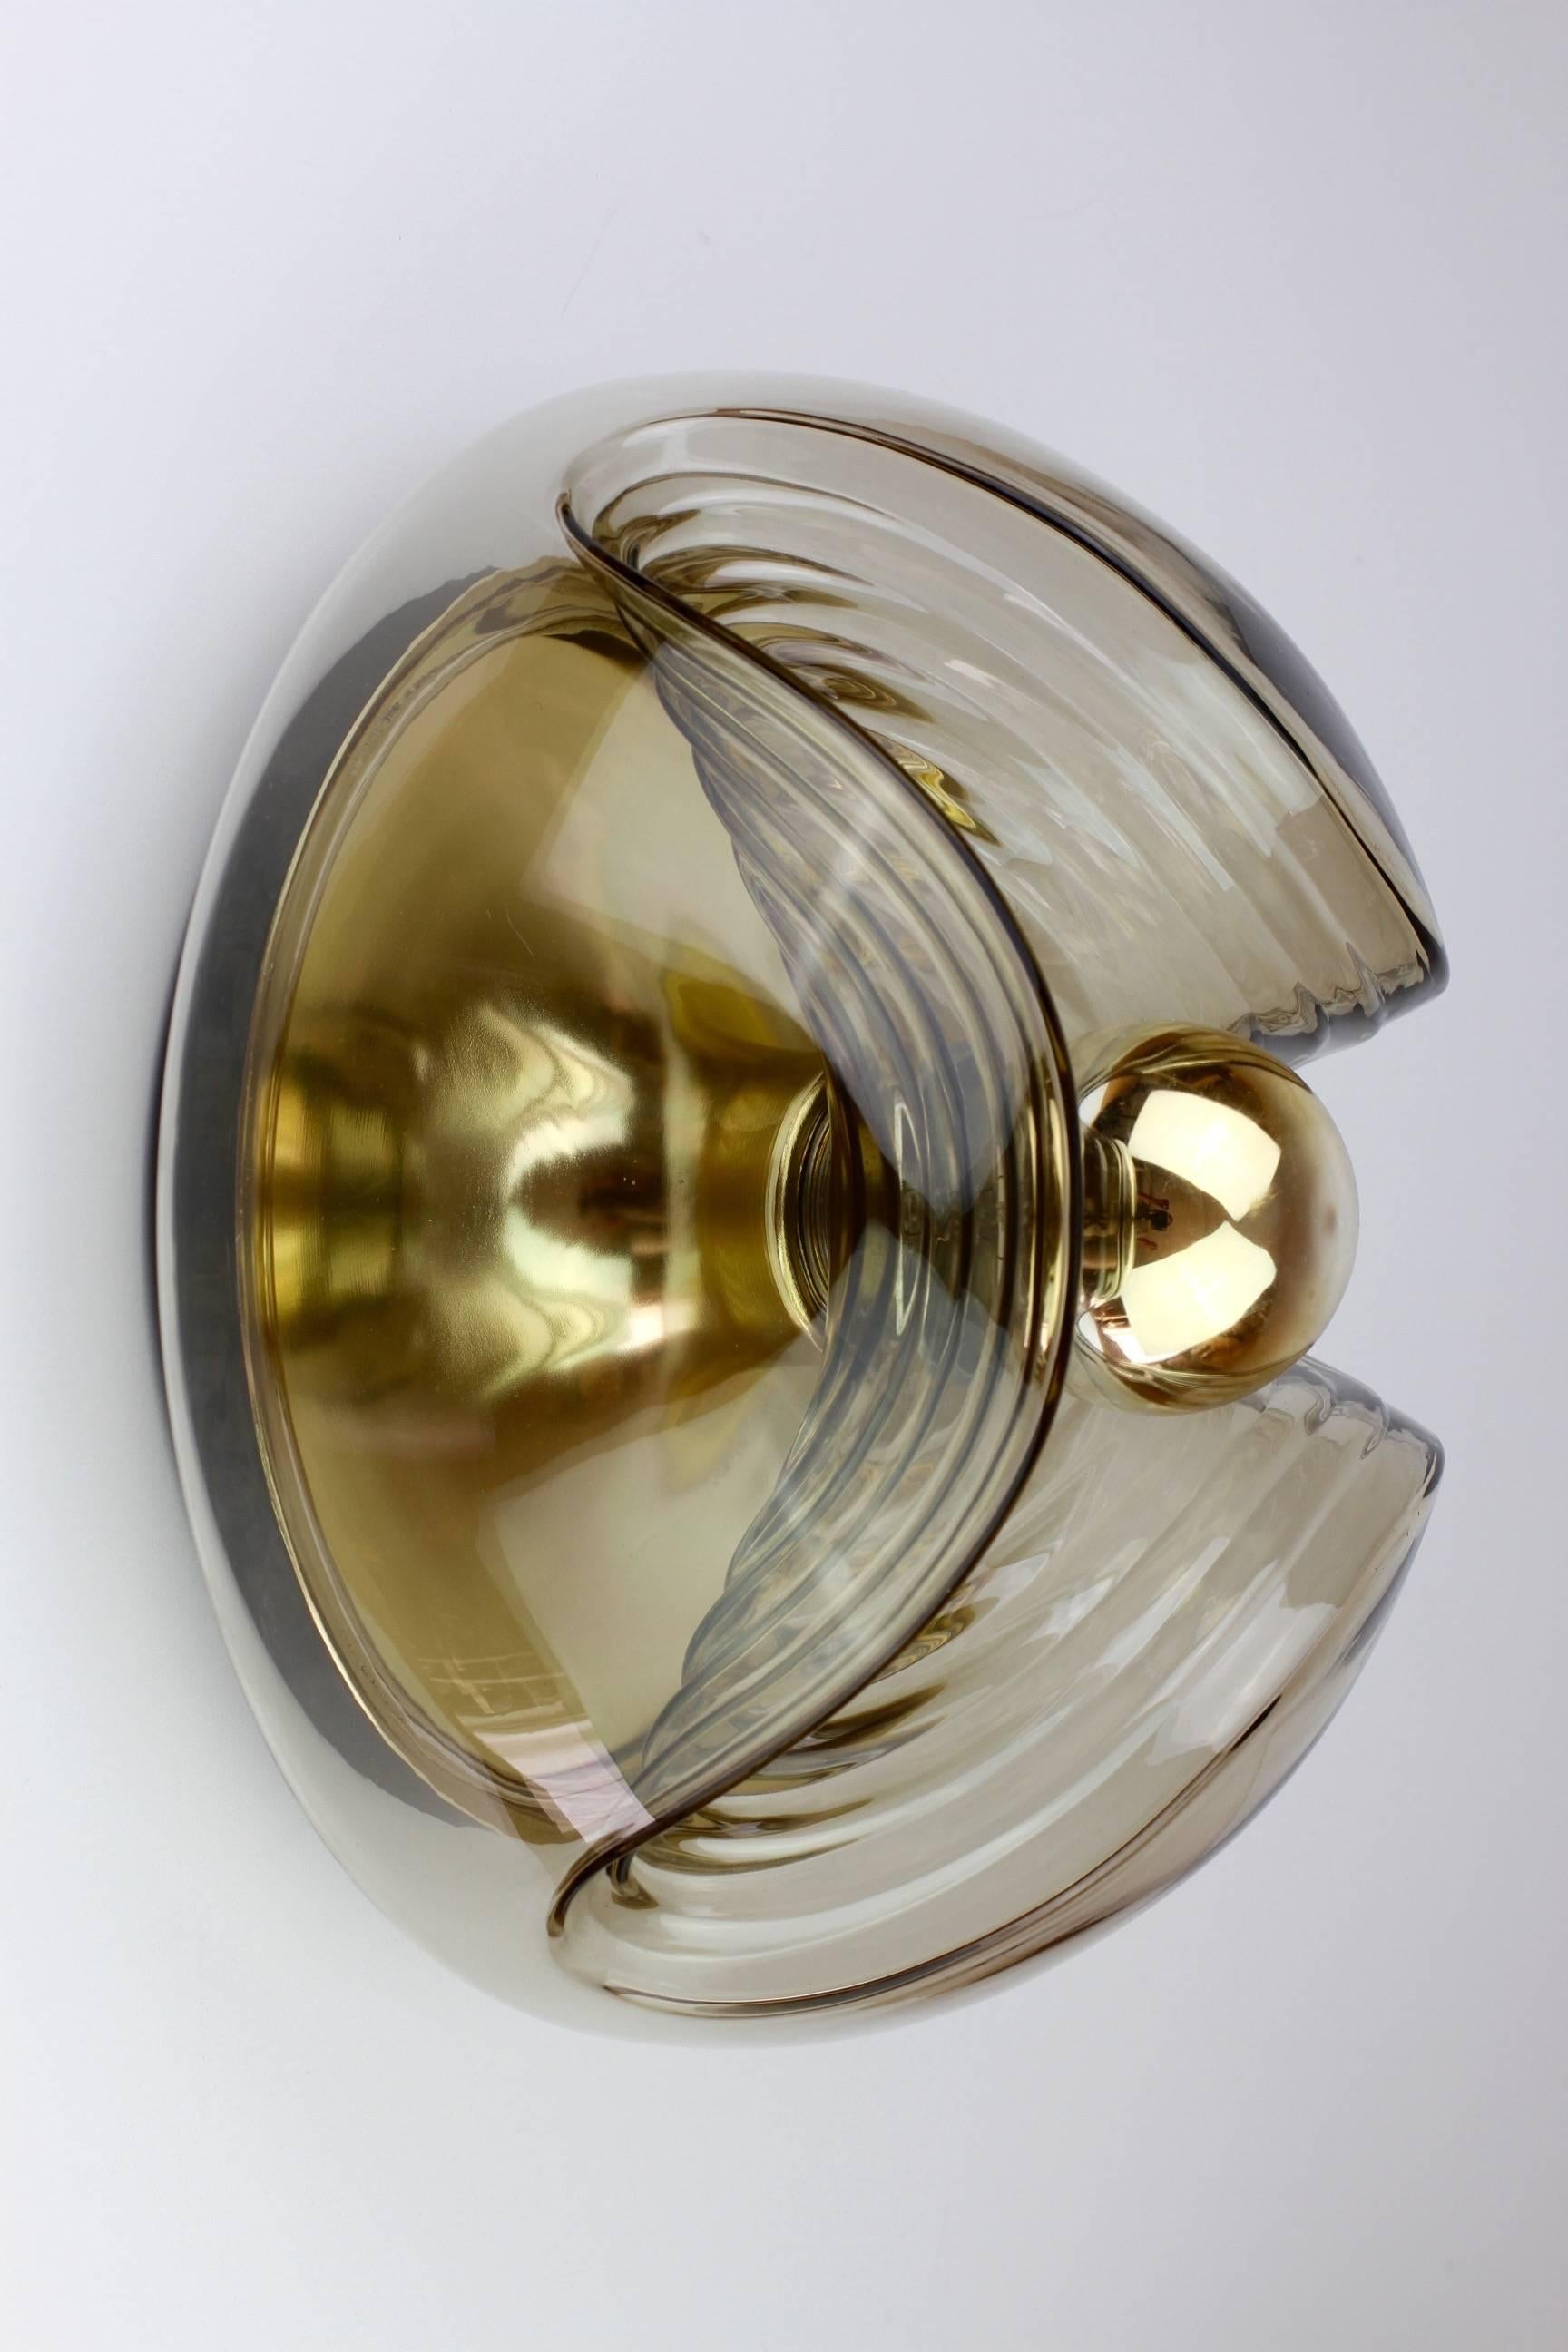 One of a set of three midcentury flushmount wall lights or sconces designed by Koch & Lowy for Peill & Putzler in the 1970s. This is an absolutely Classic piece of design, featuring a smoked colored (colored) glass globe shade with a waved/ribbed